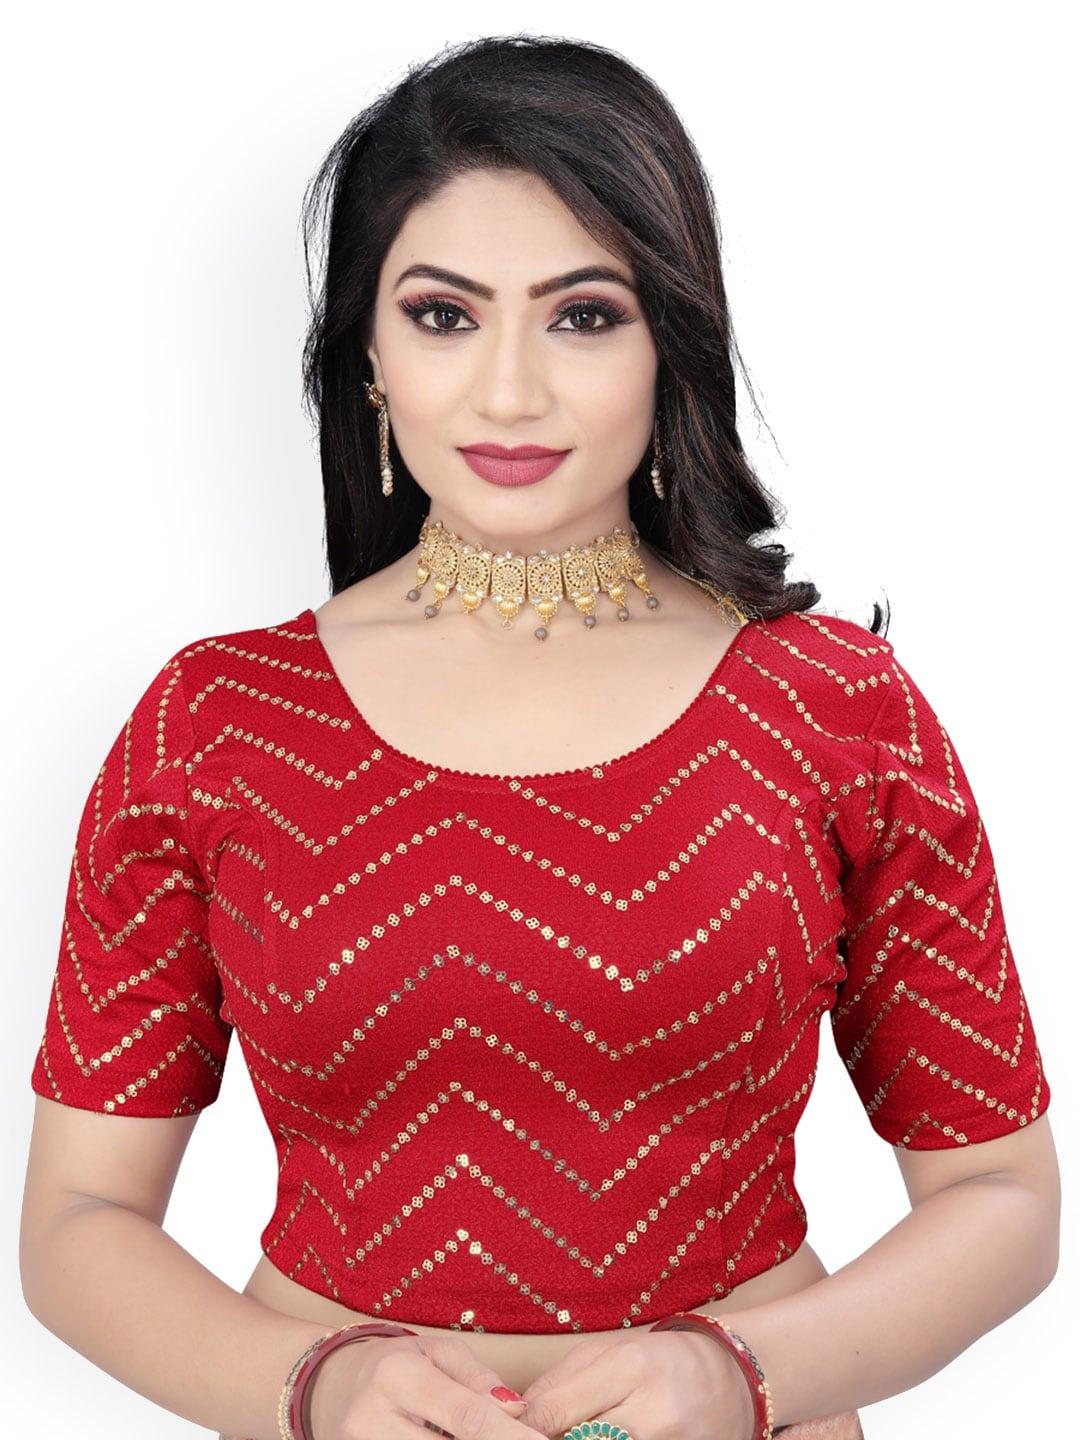 HIMRISE Embroidered Sequinned Saree Blouse